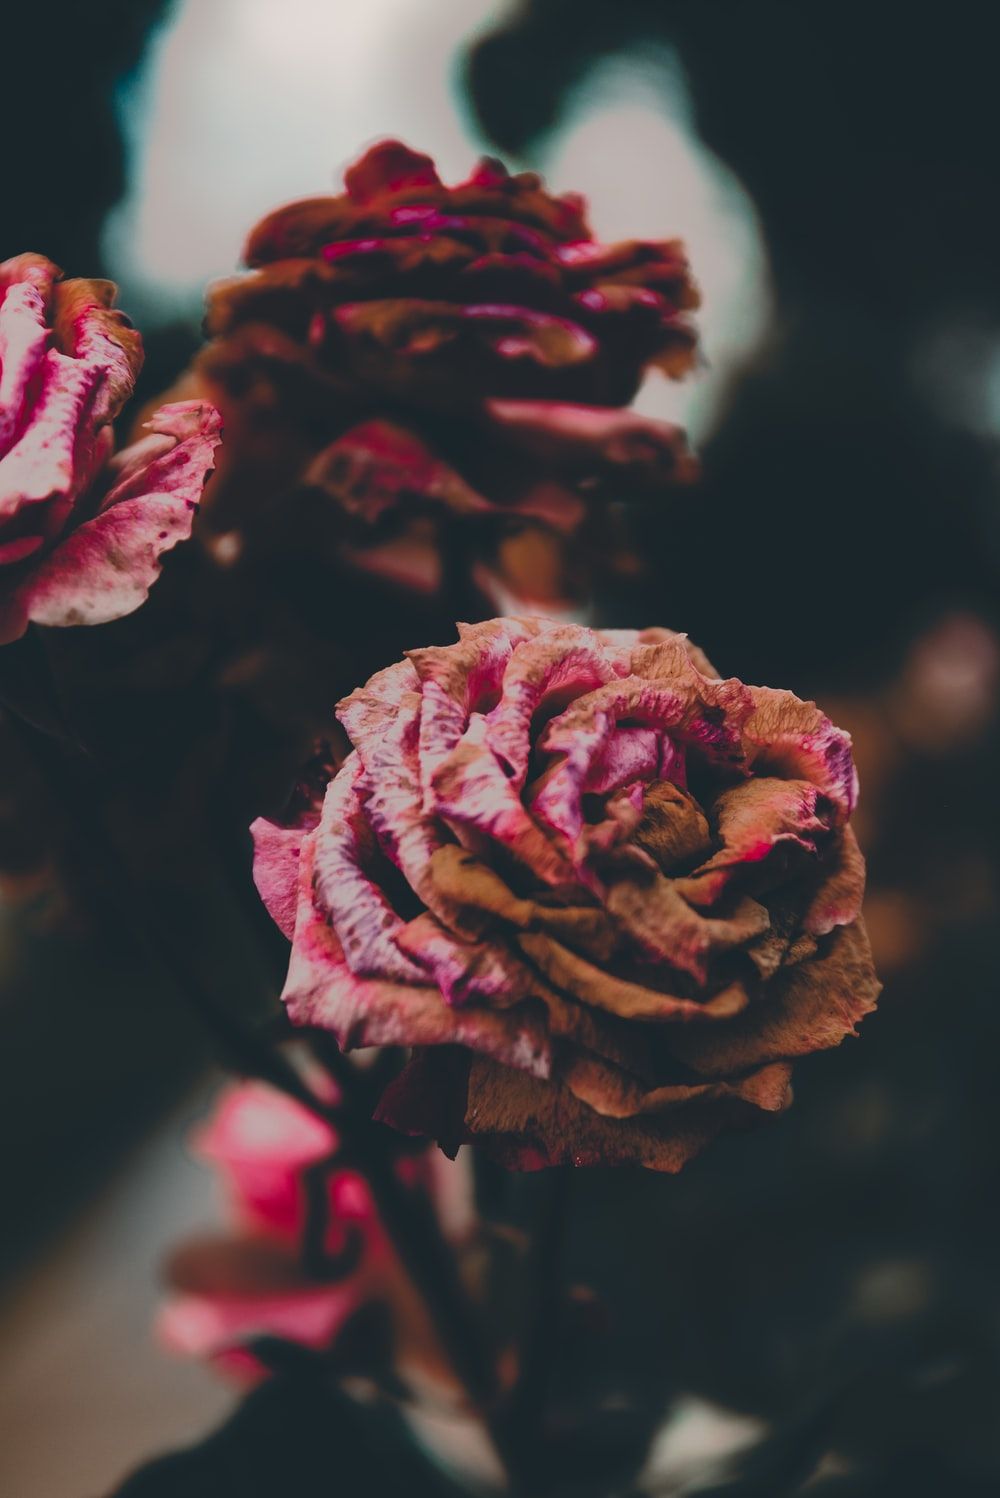 Dead Flowers Picture. Download Free Image